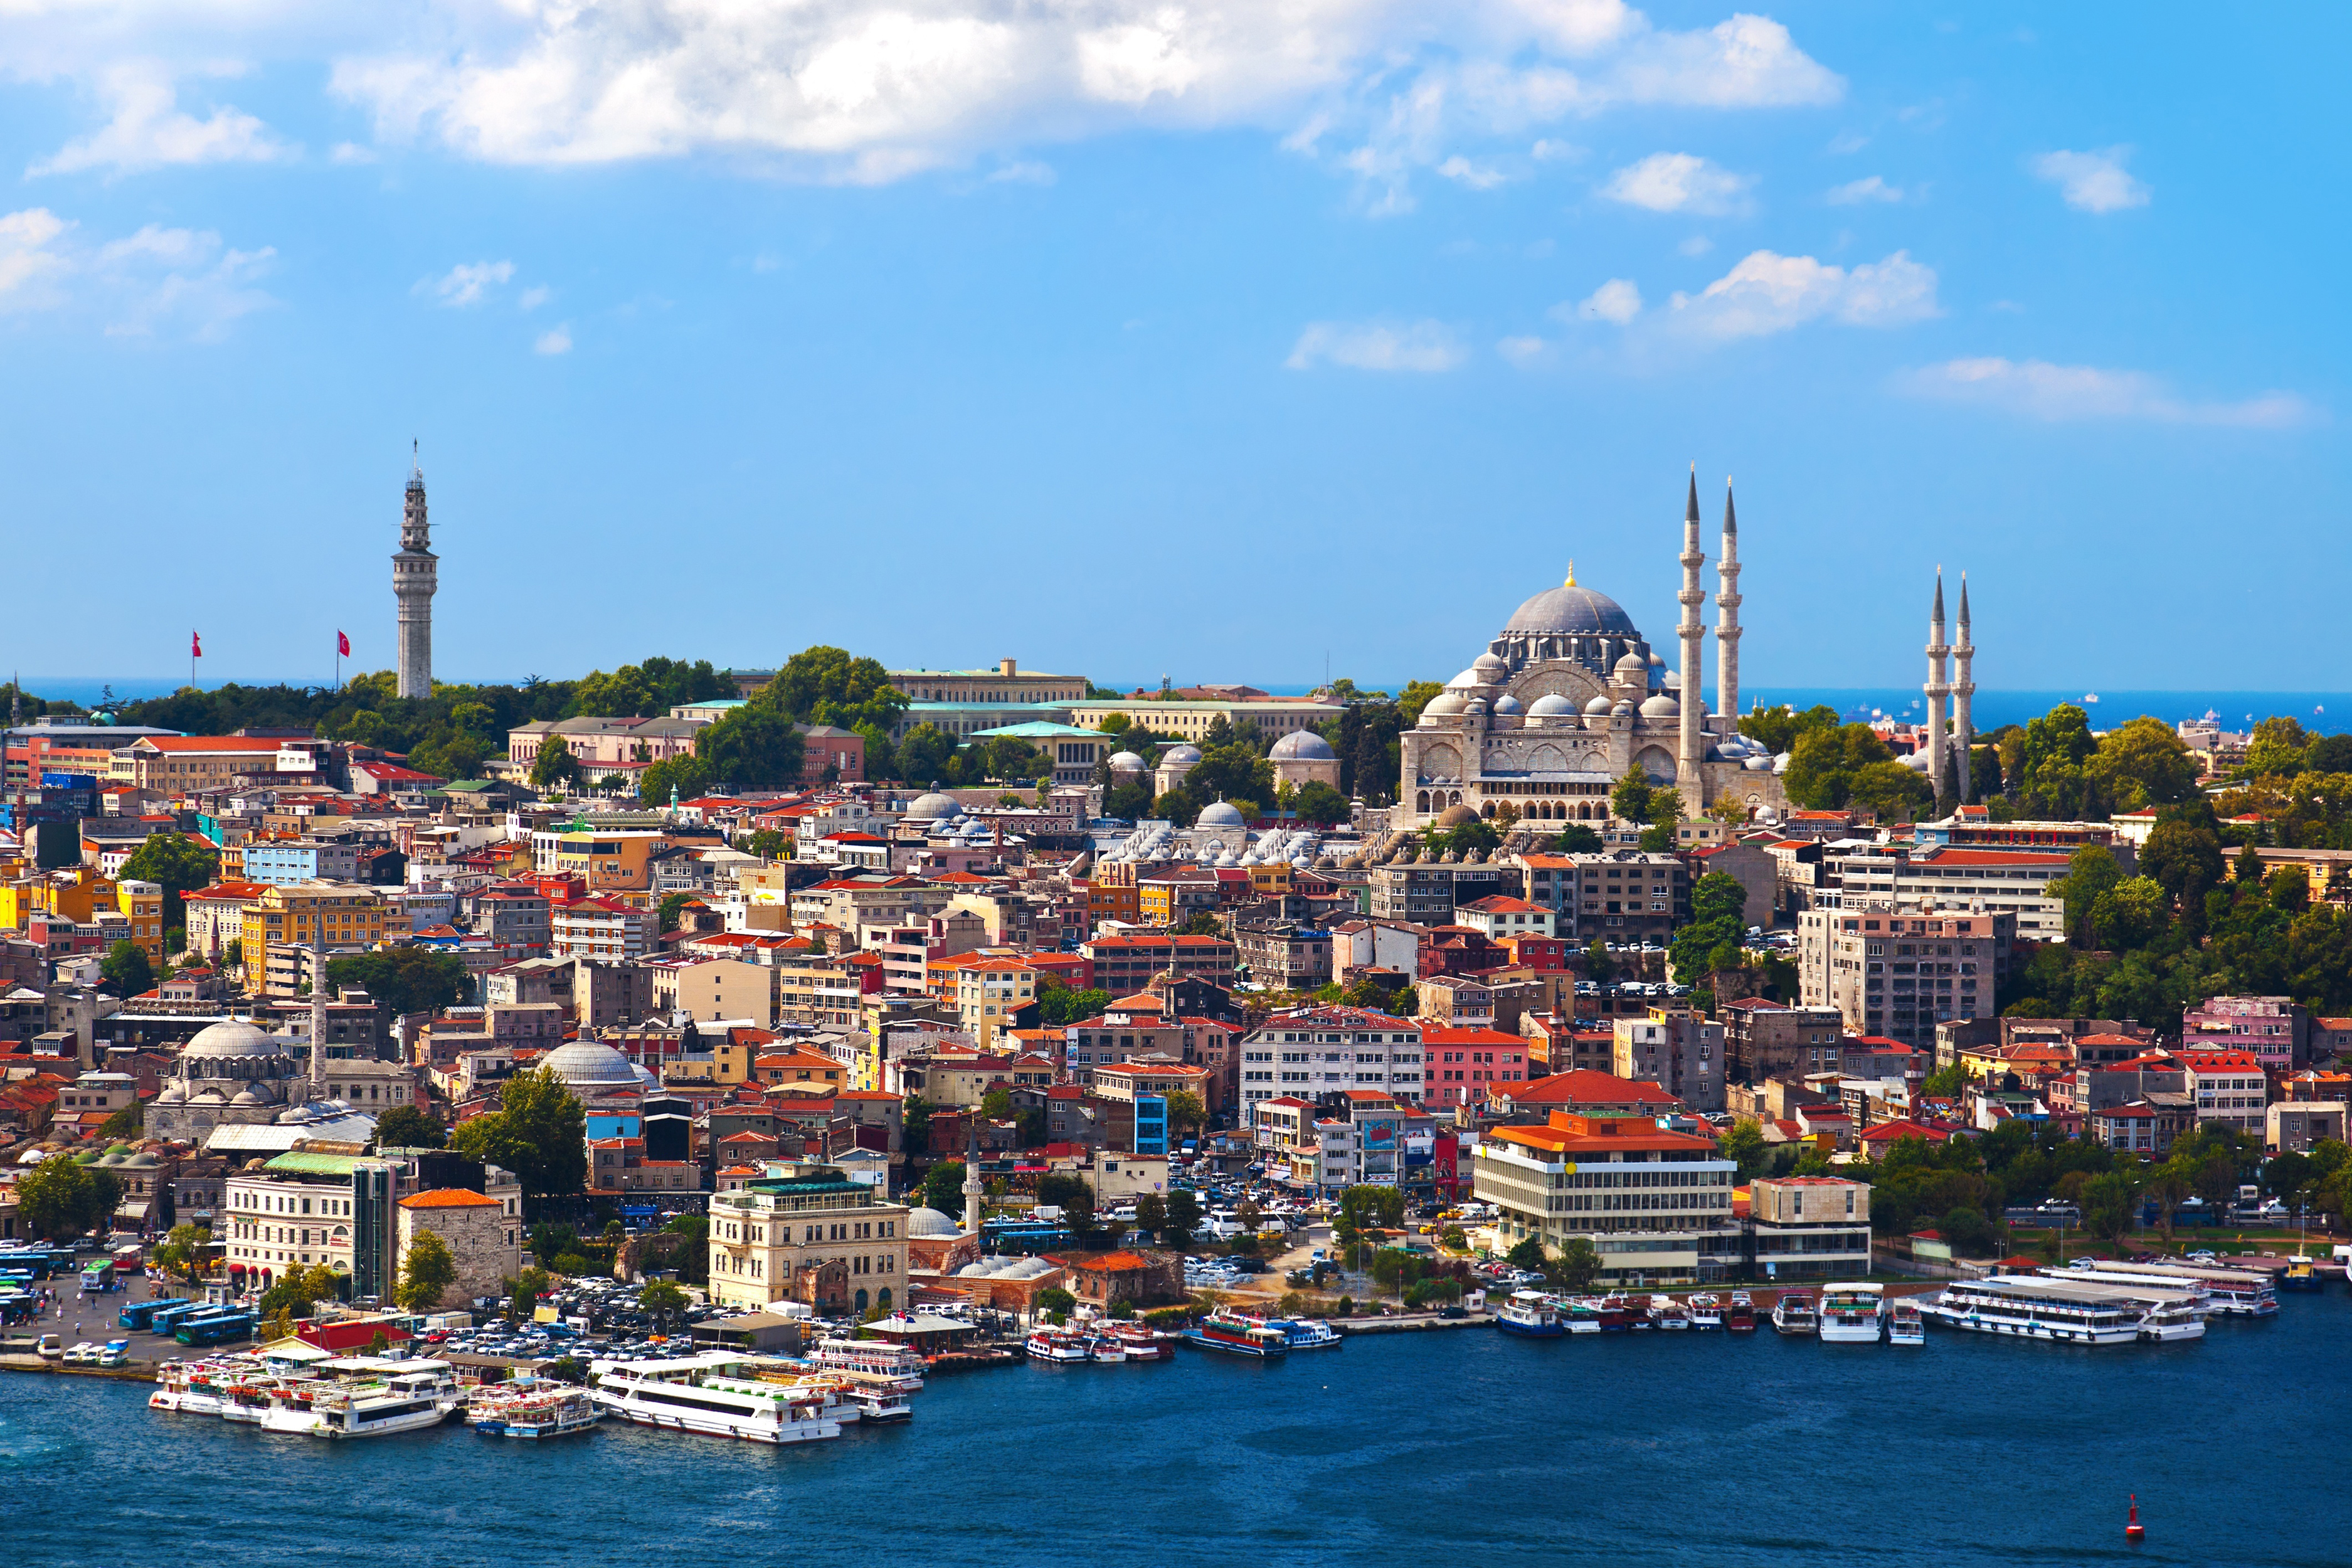 turkey, man made, istanbul, building, city, house, mosque, cities